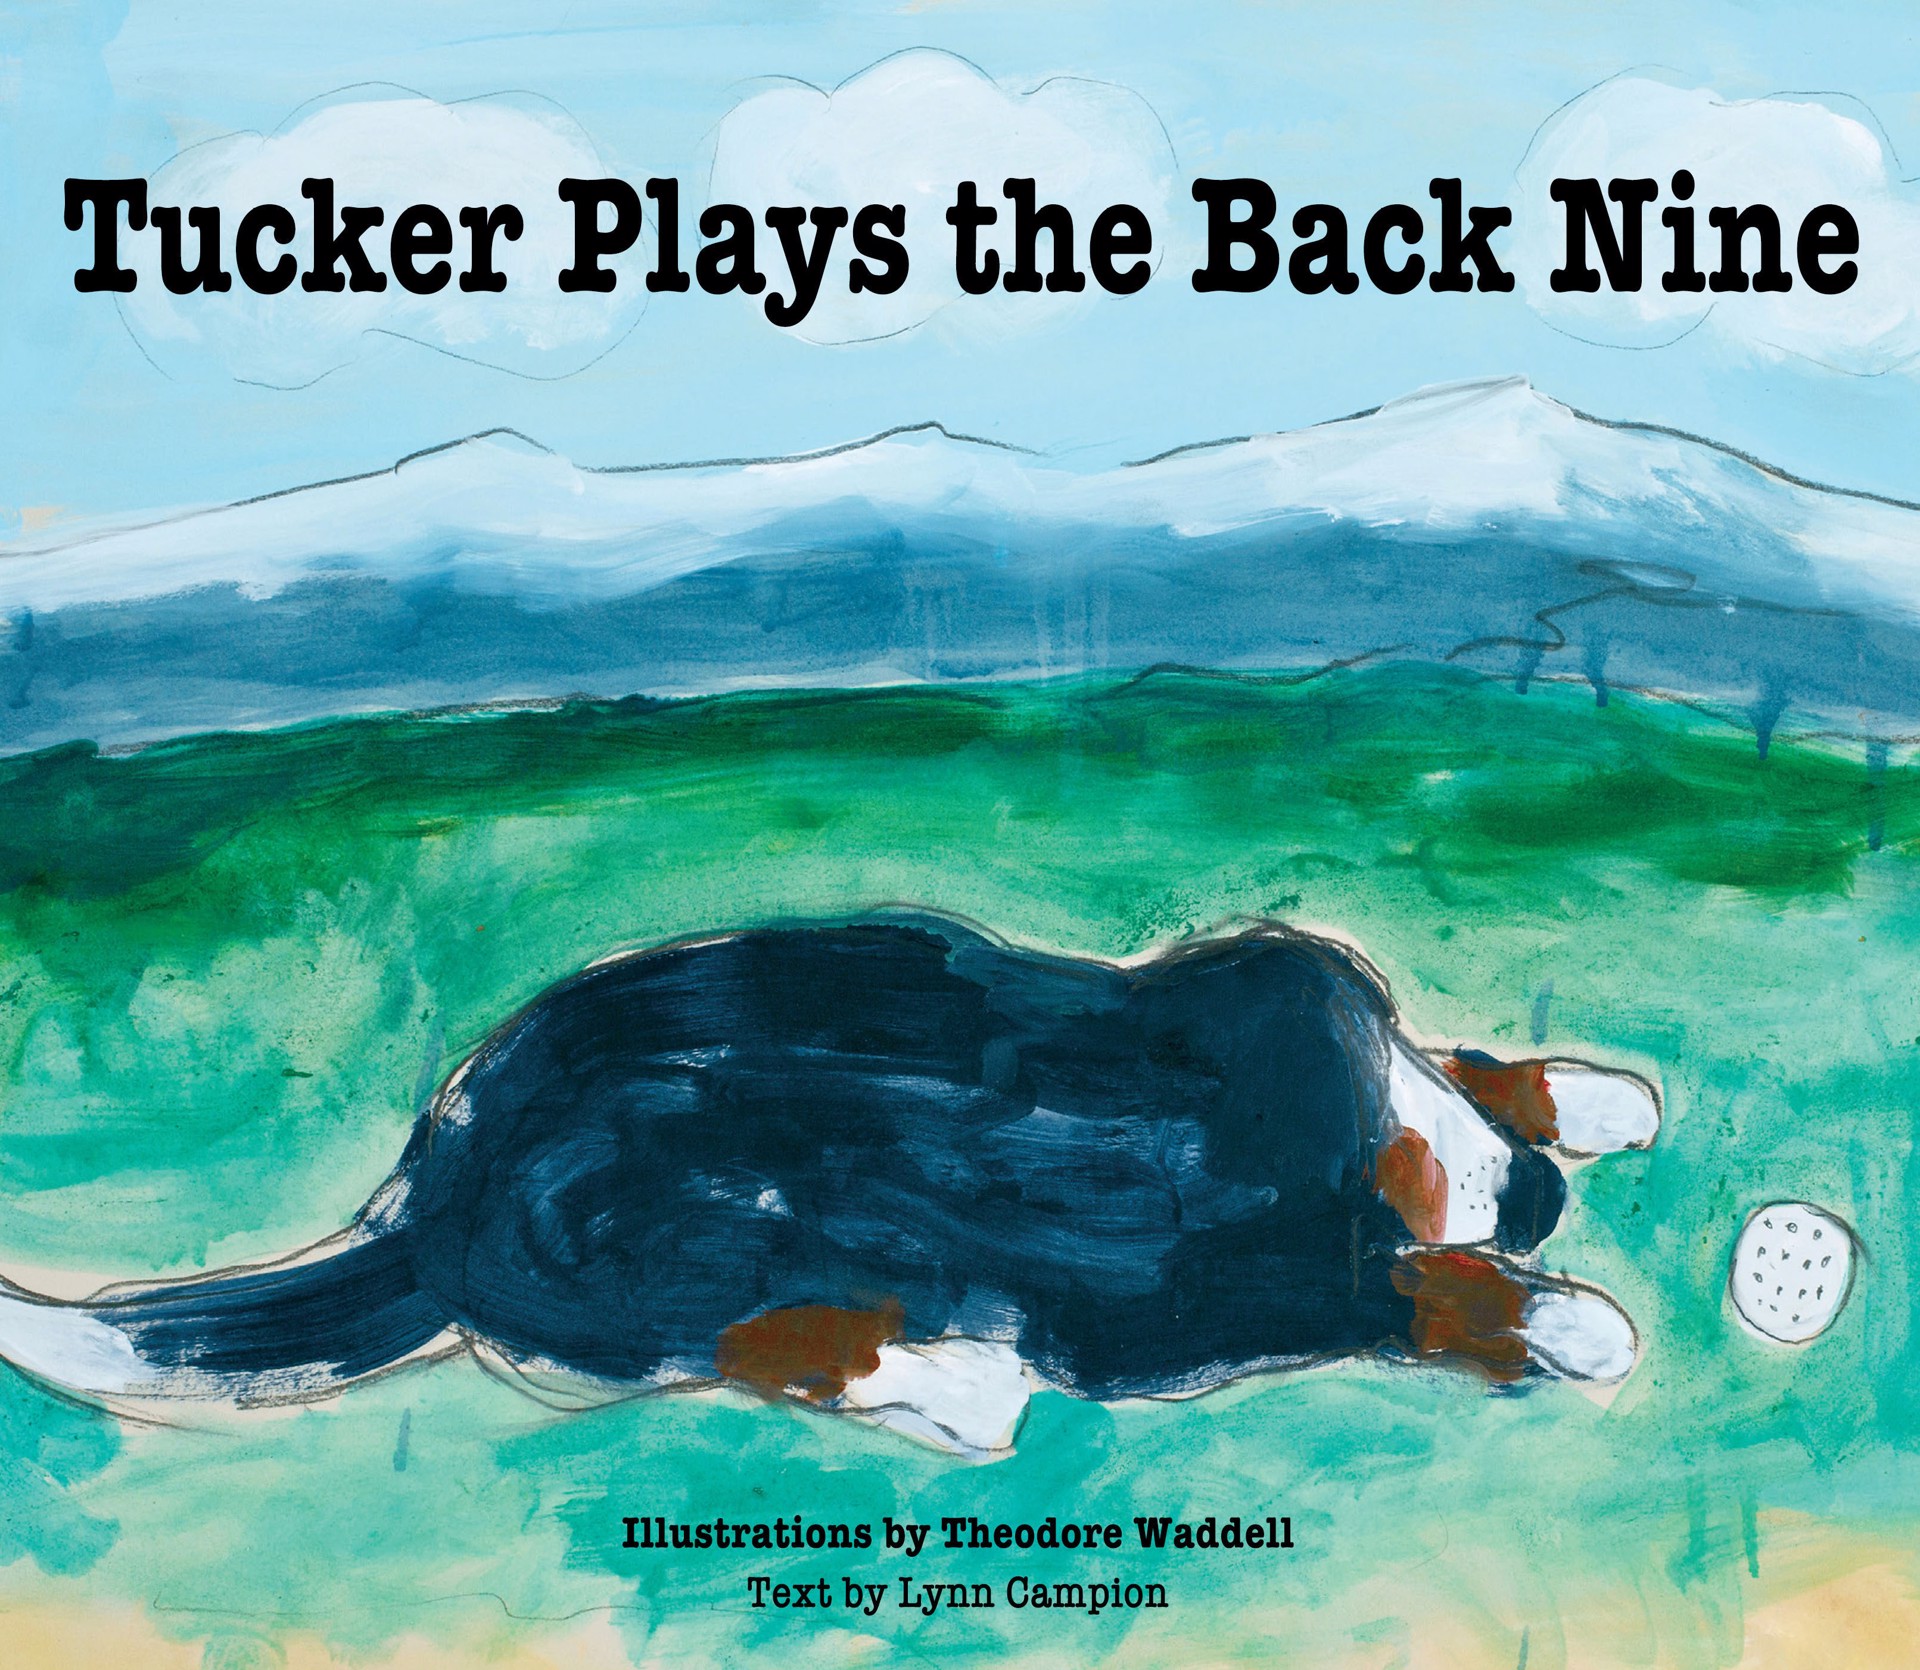 Tucker Plays the Back Nine by Theodore Waddell